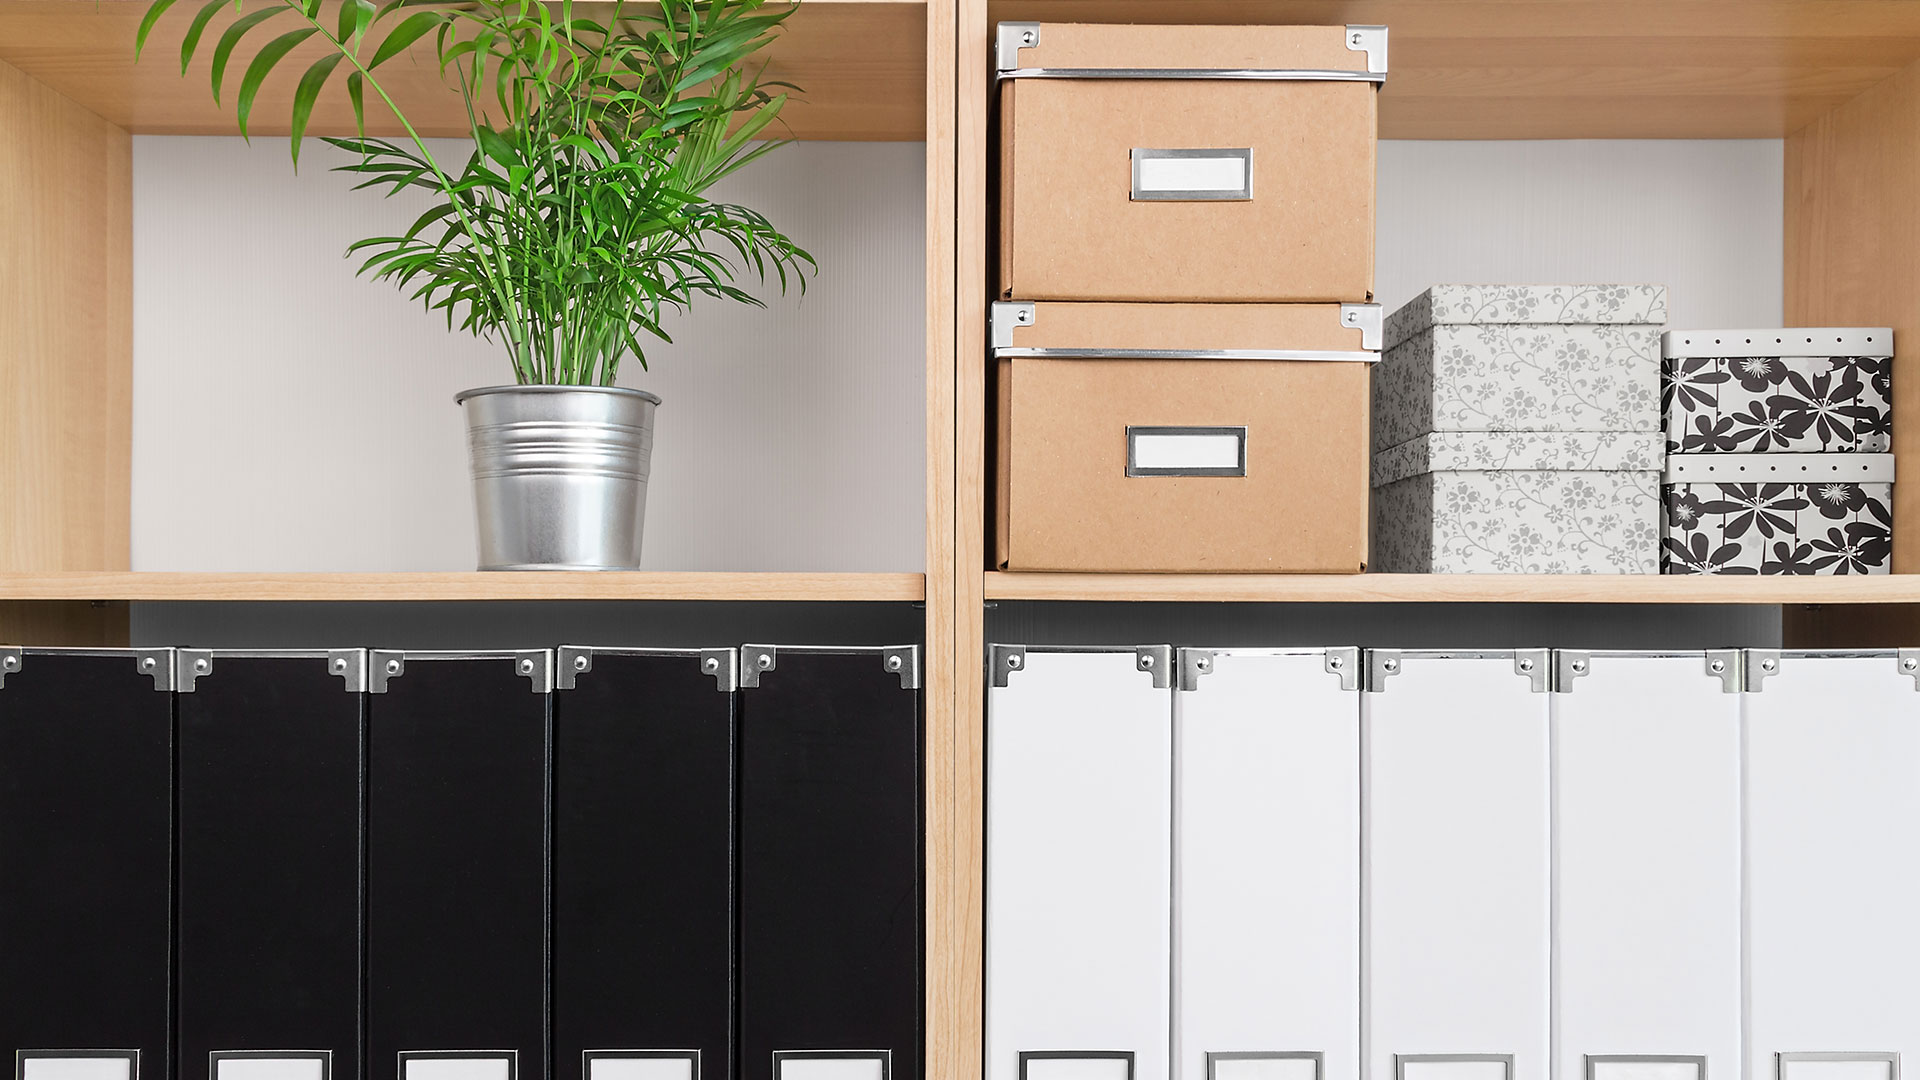 Very tidy office shelfs with neat boxes, files and a plant in a silver pot. 